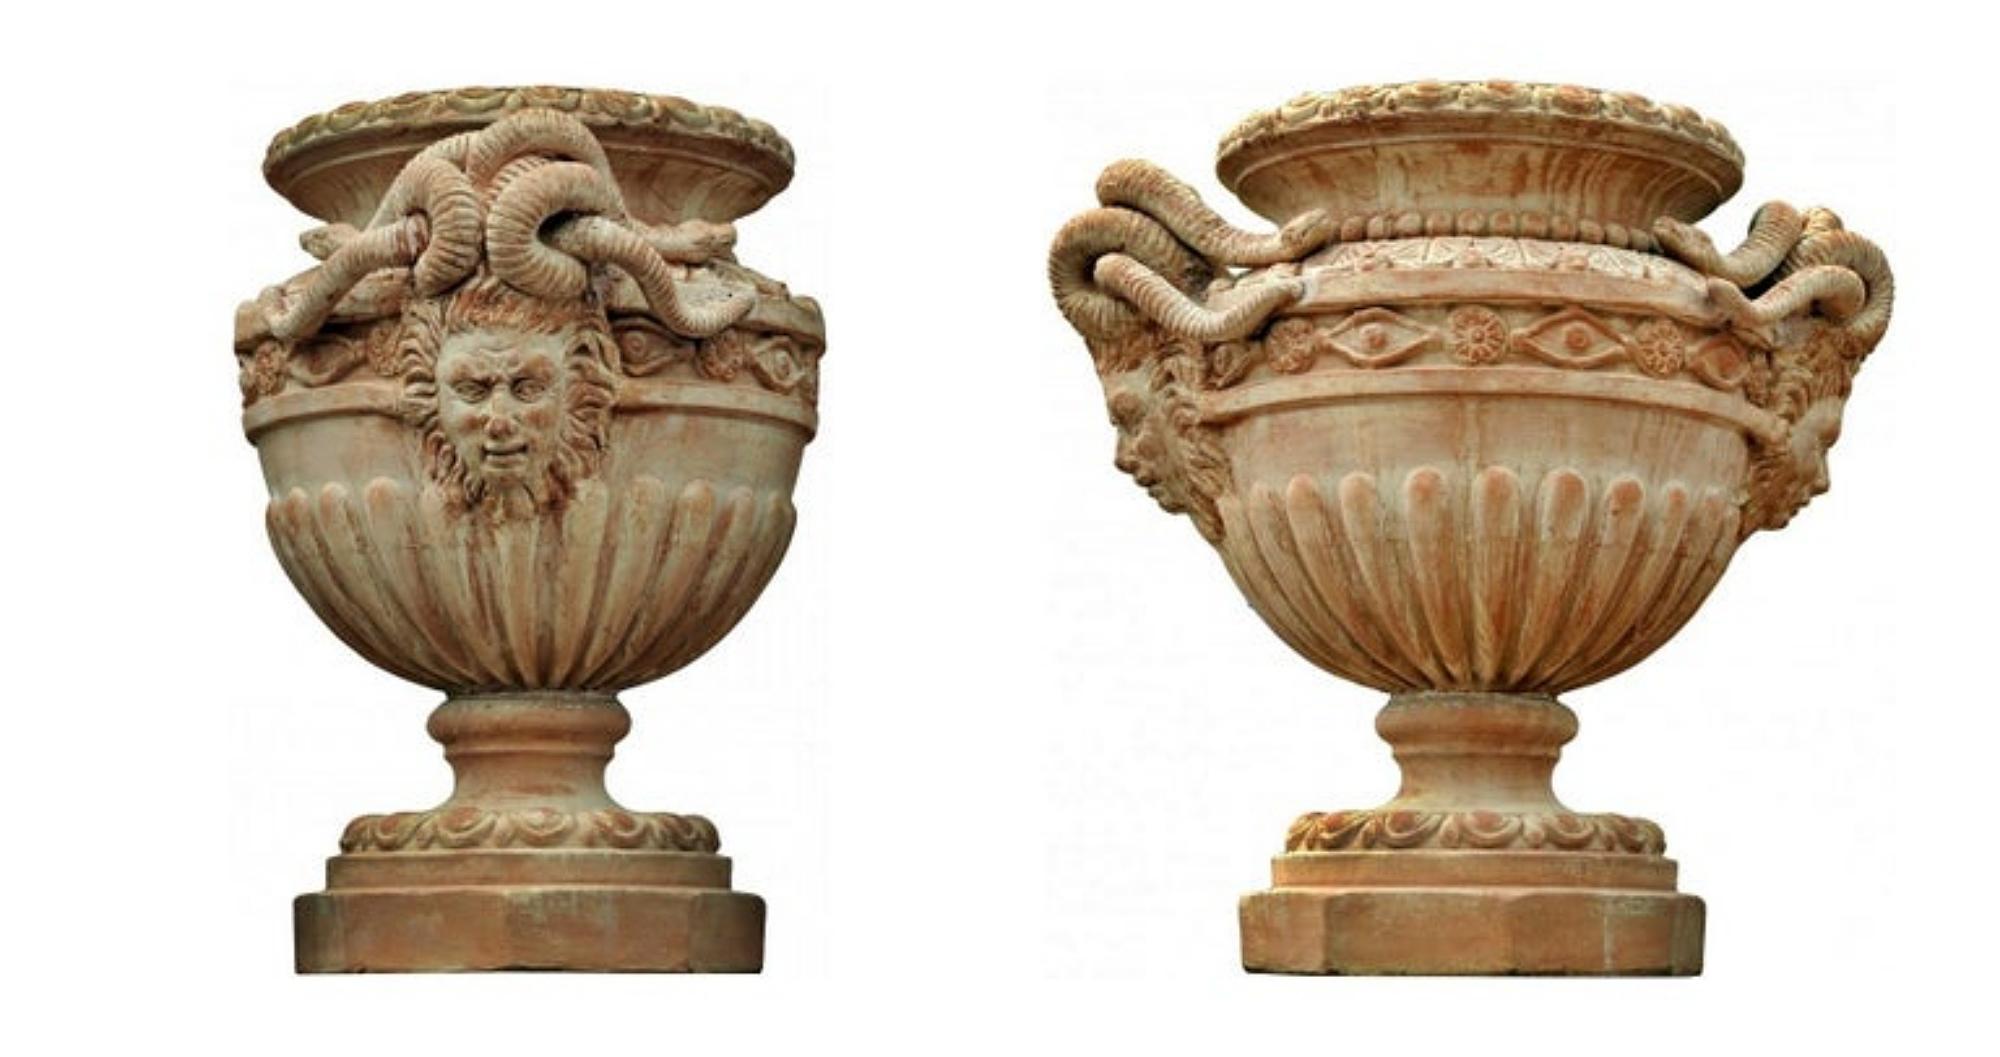 Large Mediceo Florentine Renaissance vase with Medusas

Early 20th century

Superb large poded vases with two large jellyfish and two rounds of Romanesque ocelli.
Particularly neat, very beautiful vase.

Measures: Height 75 cm
Octagonal base